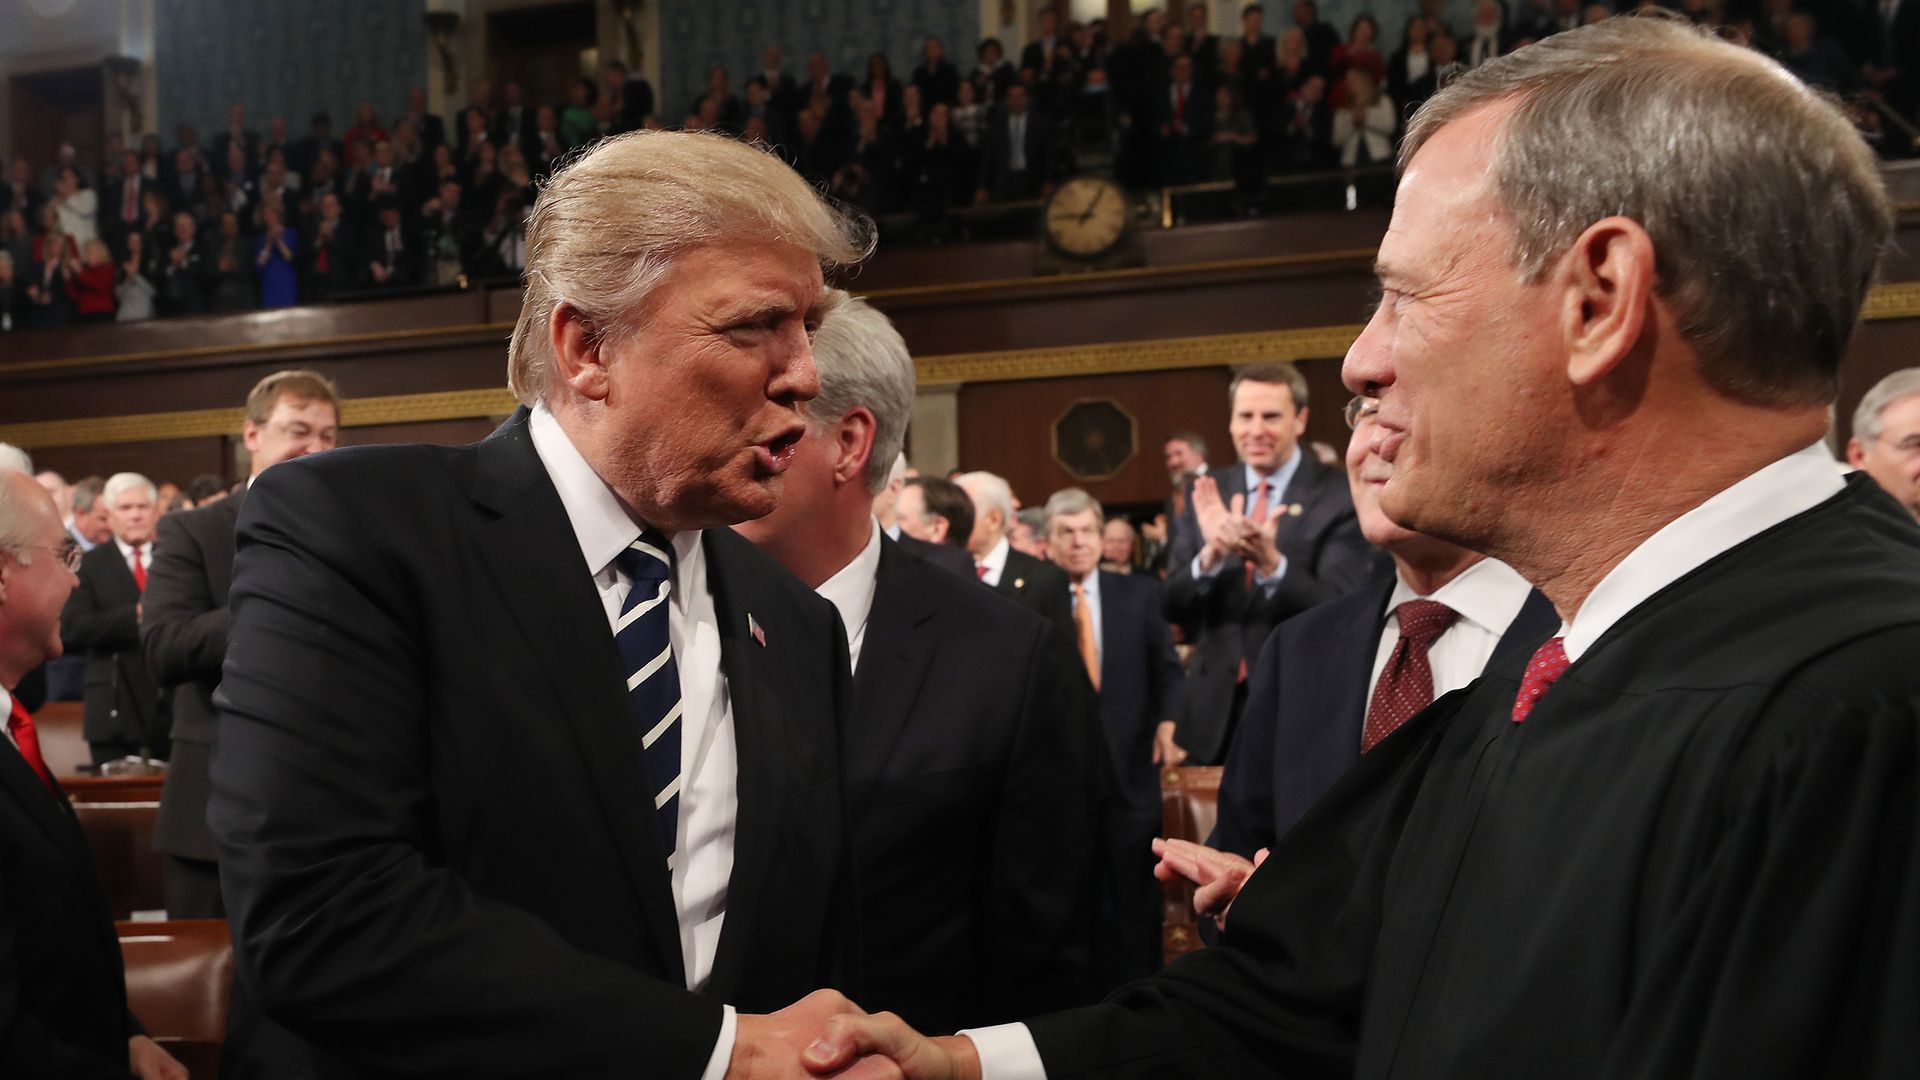 President Trump shakes hands with Chief Justice John Roberts